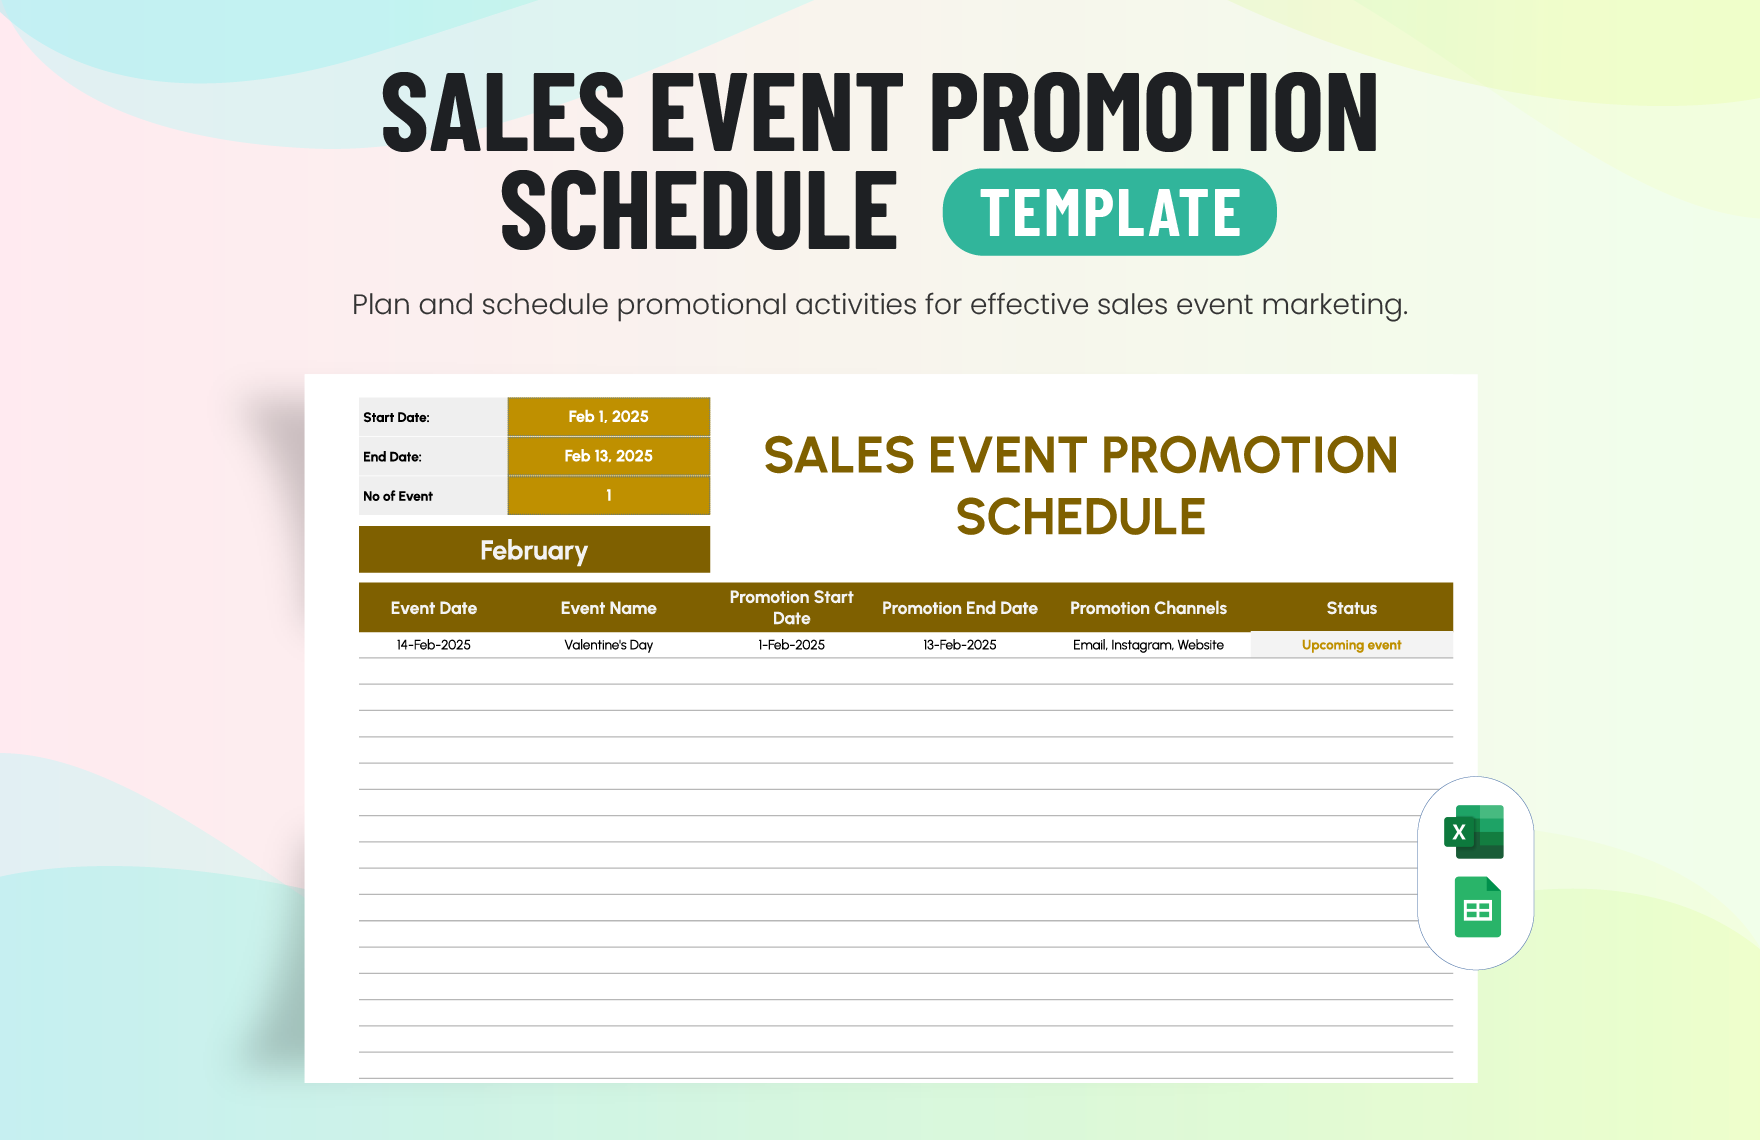 Sales Event Promotion Schedule Template in Excel, Google Sheets